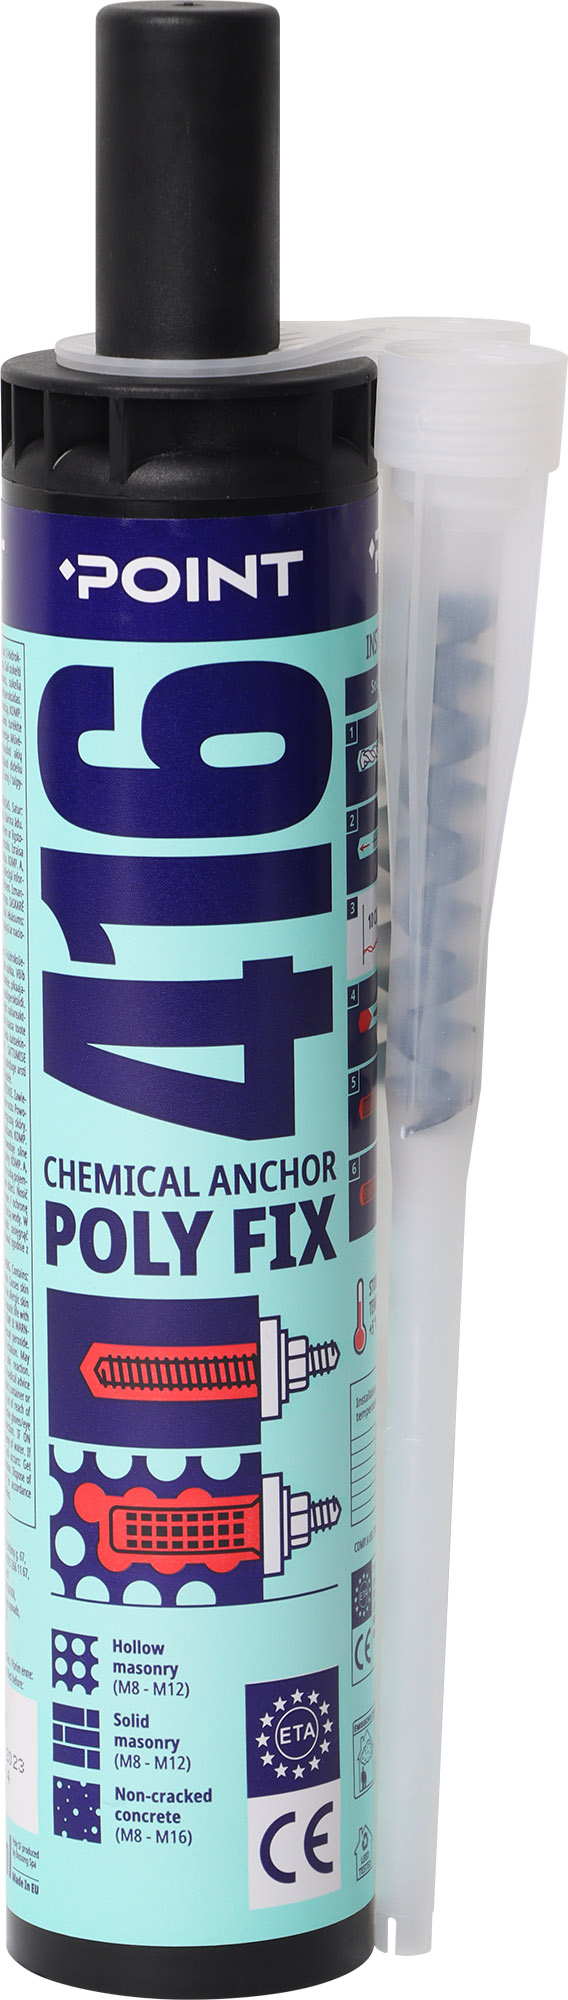 416 POLY FIX polyester base chemical anchor